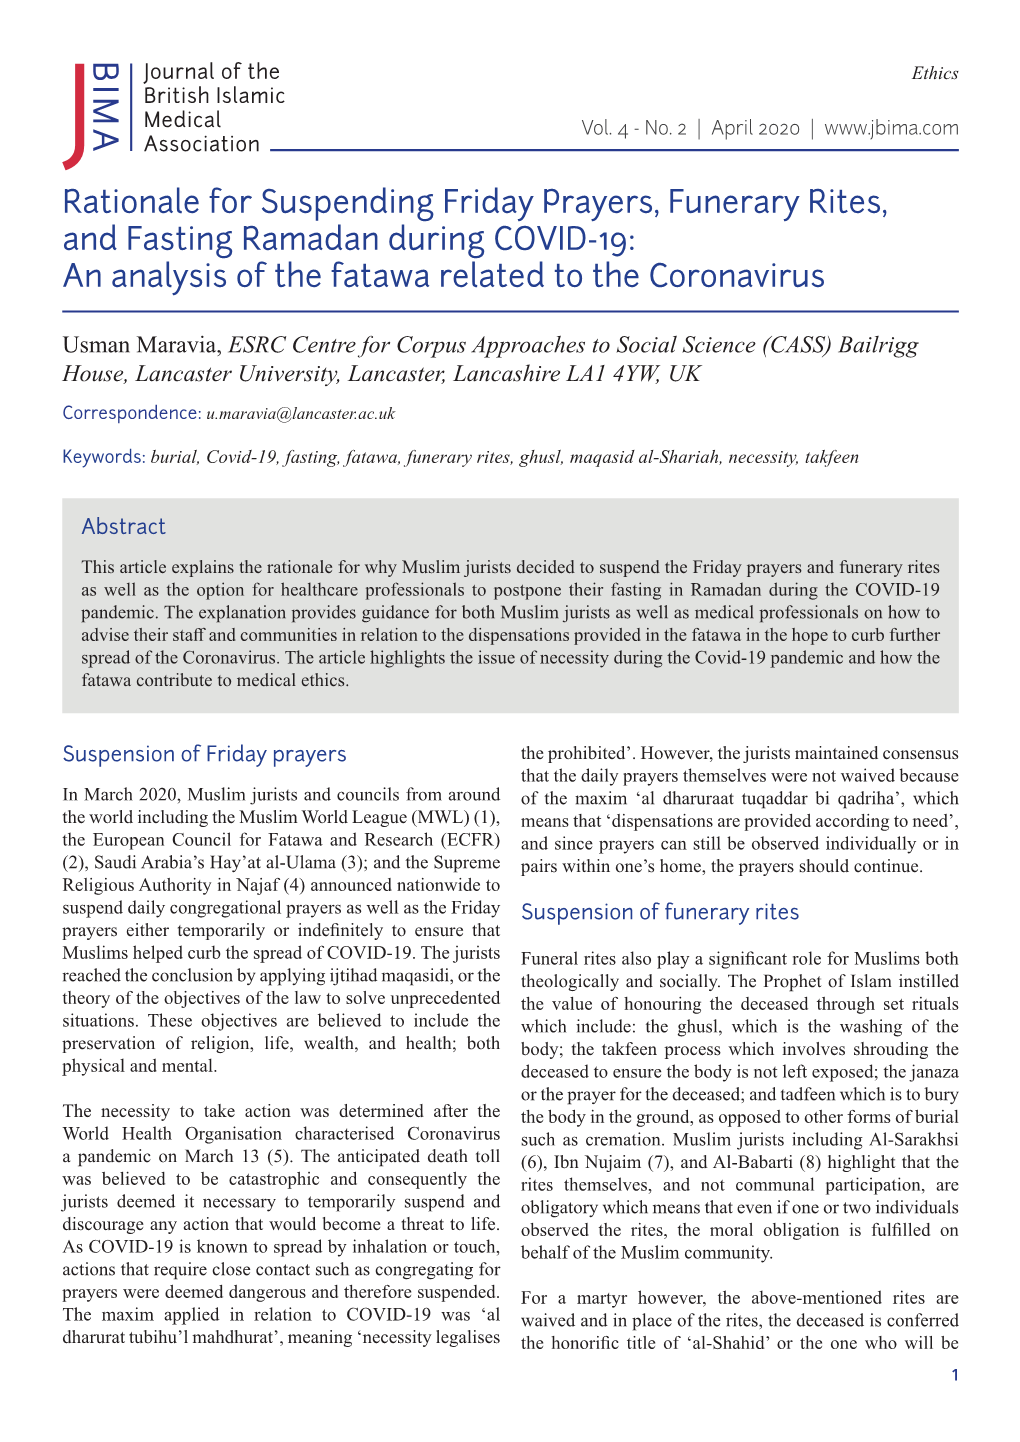 Rationale for Suspending Friday Prayers, Funerary Rites, and Fasting Ramadan During COVID-19: an Analysis of the Fatawa Related to the Coronavirus